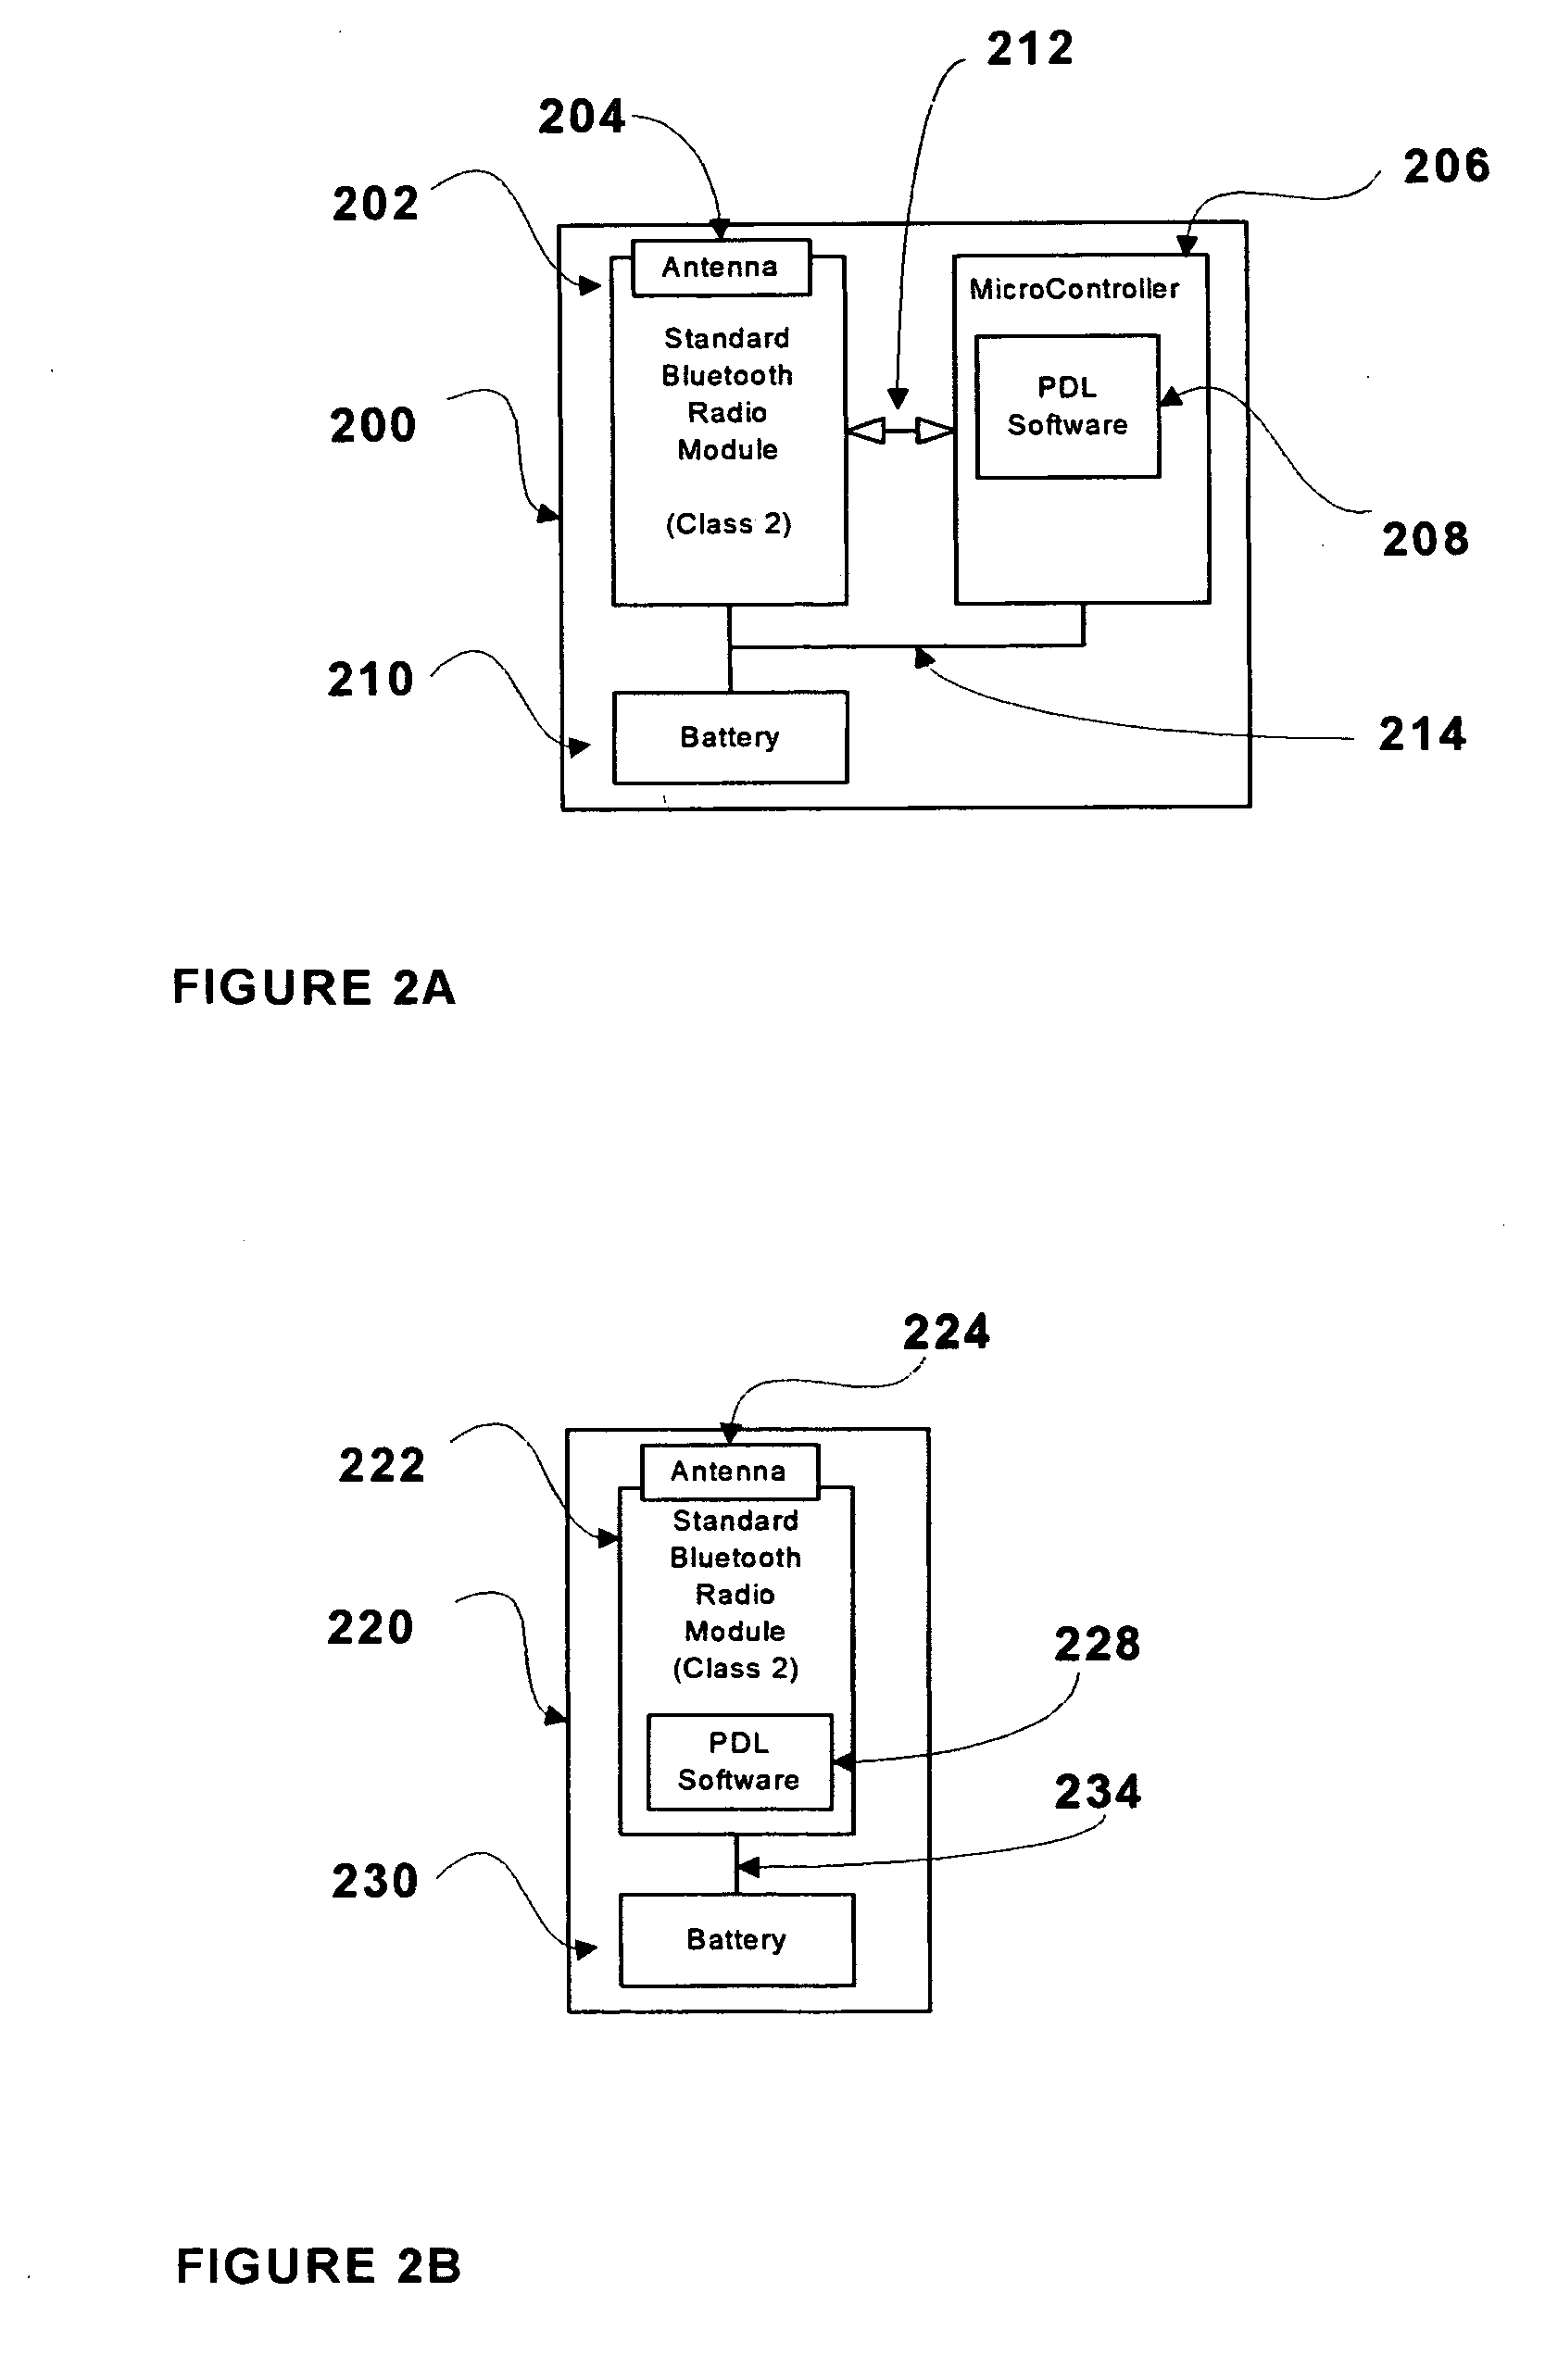 Wireless access management and control for personal computing devices